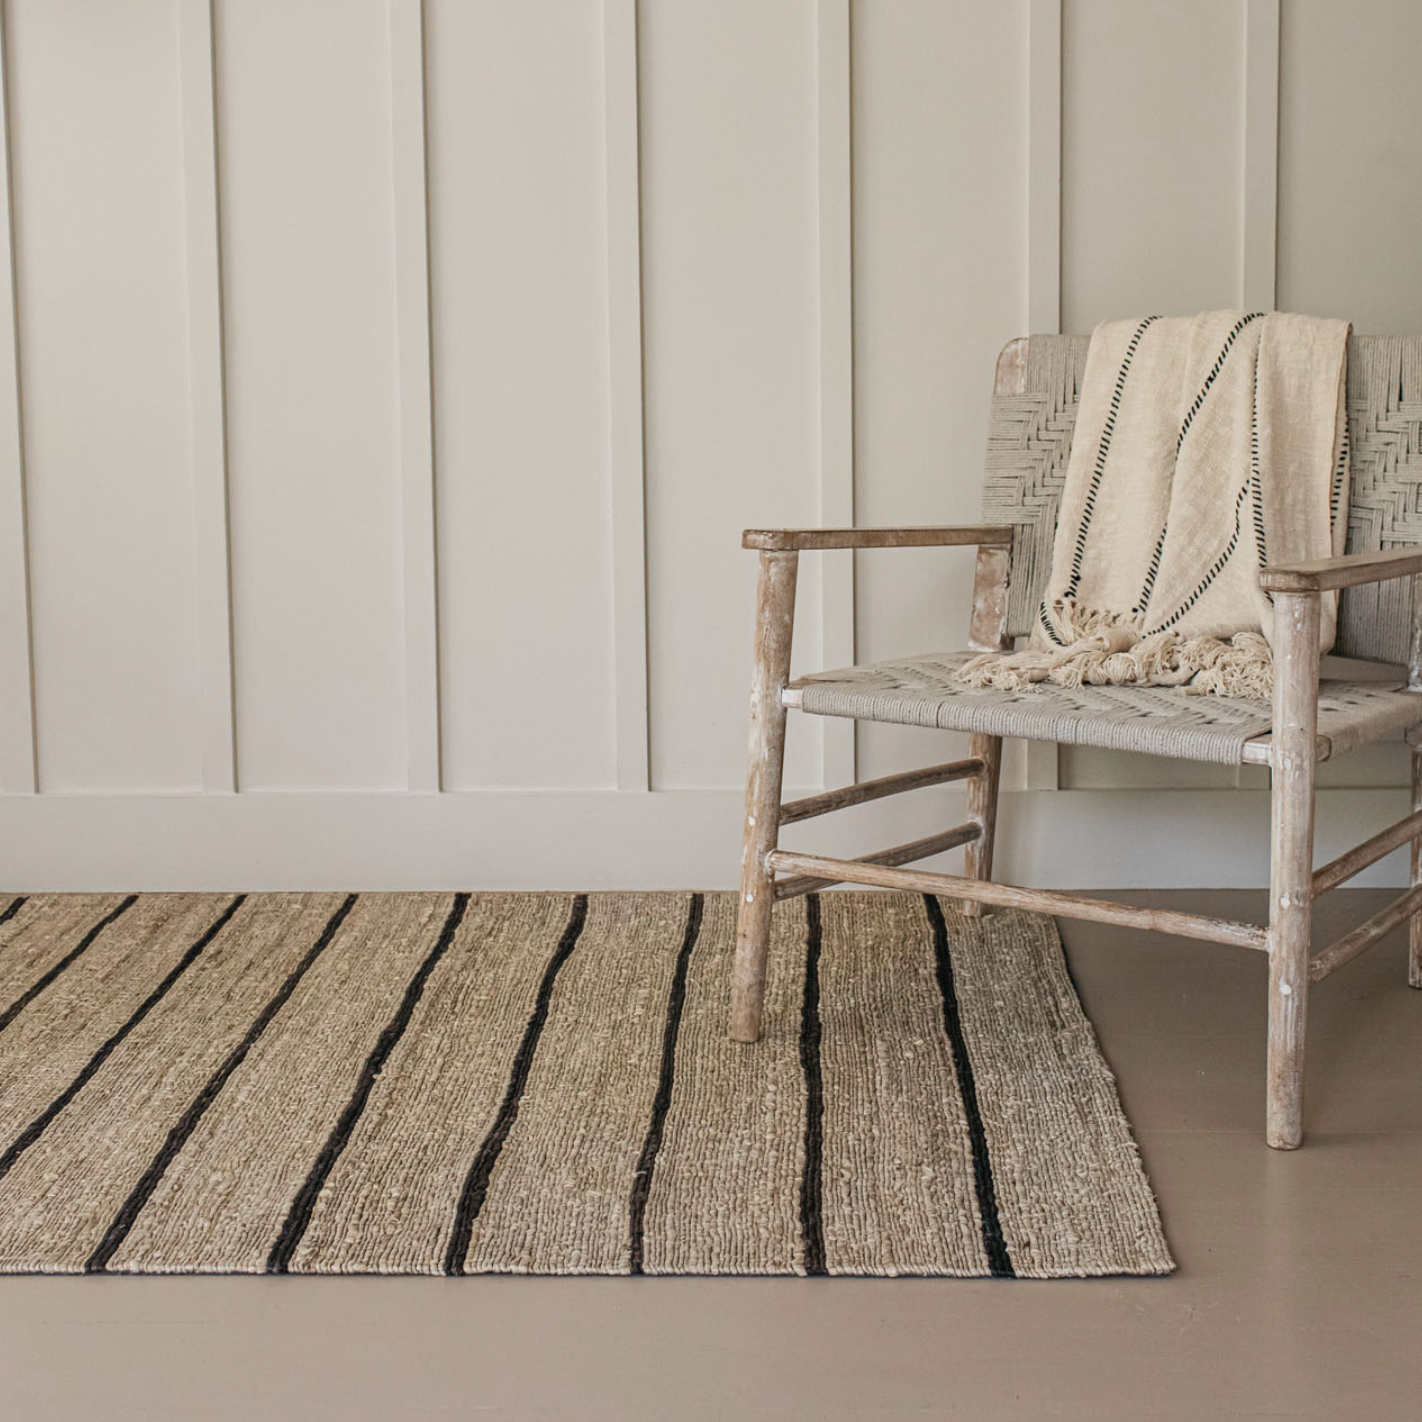 A striped jute rug with a wooden armchair. 